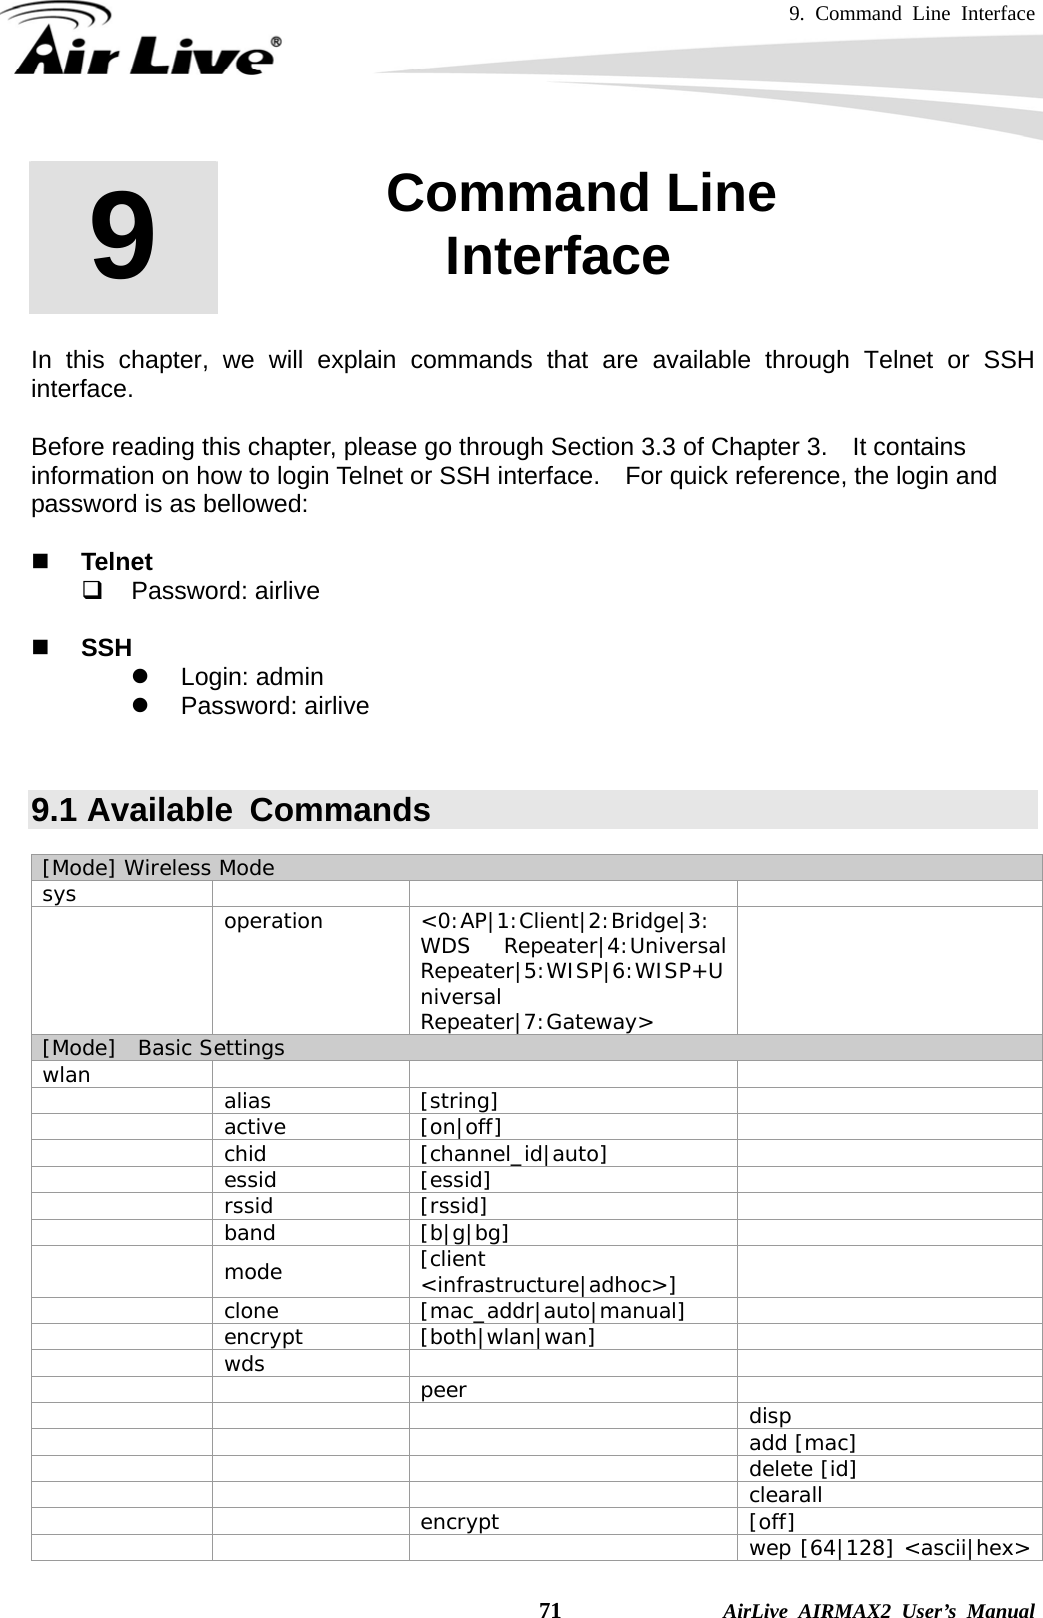 9. Command Line Interface    71              AirLive AIRMAX2 User’s Manual       In this chapter, we will explain commands that are available through Telnet or SSH interface.    Before reading this chapter, please go through Section 3.3 of Chapter 3.  It contains information on how to login Telnet or SSH interface.    For quick reference, the login and password is as bellowed:   Telnet  Password: airlive   SSH z Login: admin z Password: airlive  9.1 Available  Commands [Mode] Wireless Mode sys       operation &lt;0:AP|1:Client|2:Bridge|3:WDS Repeater|4:Universal Repeater|5:WISP|6:WISP+Universal Repeater|7:Gateway&gt;  [Mode]  Basic Settings wlan       alias [string]    active  [on|off]    chid [channel_id|auto]   essid [essid]    rssid [rssid]    band [b|g|bg]    mode [client &lt;infrastructure|adhoc&gt;]    clone [mac_addr|auto|manual]   encrypt [both|wlan|wan]   wds       peer        disp      add [mac]      delete [id]      clearall    encrypt  [off]       wep [64|128] &lt;ascii|hex&gt; 9  9. Command Line Interface  